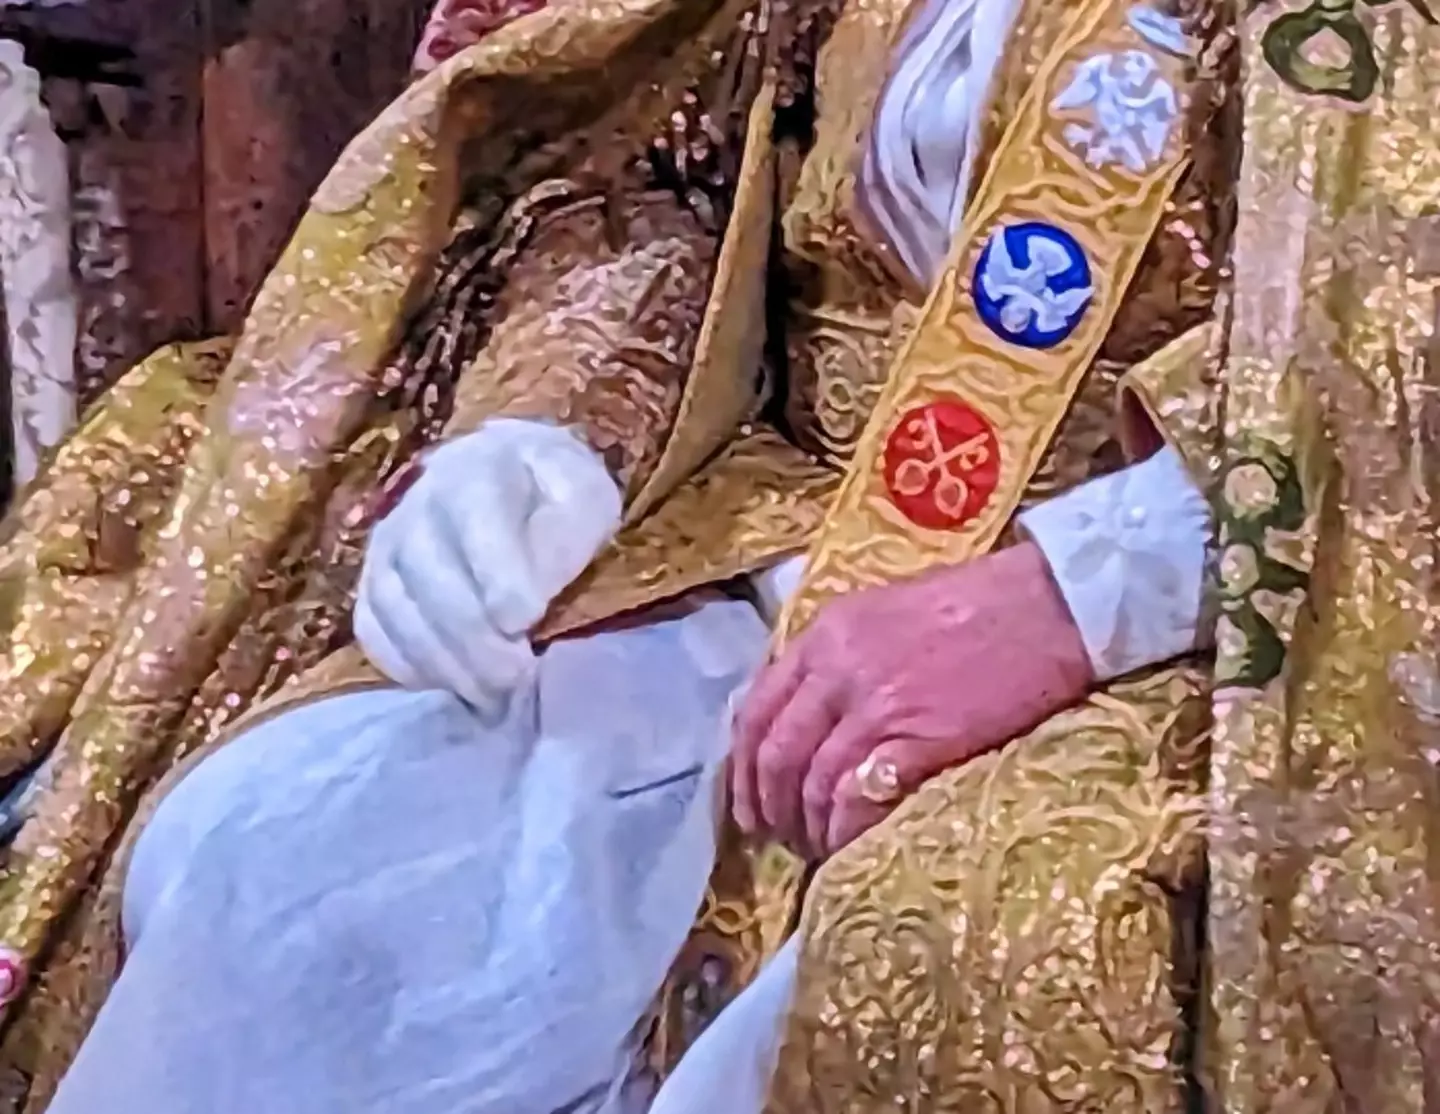 King Charles wore one glove at the coronation.